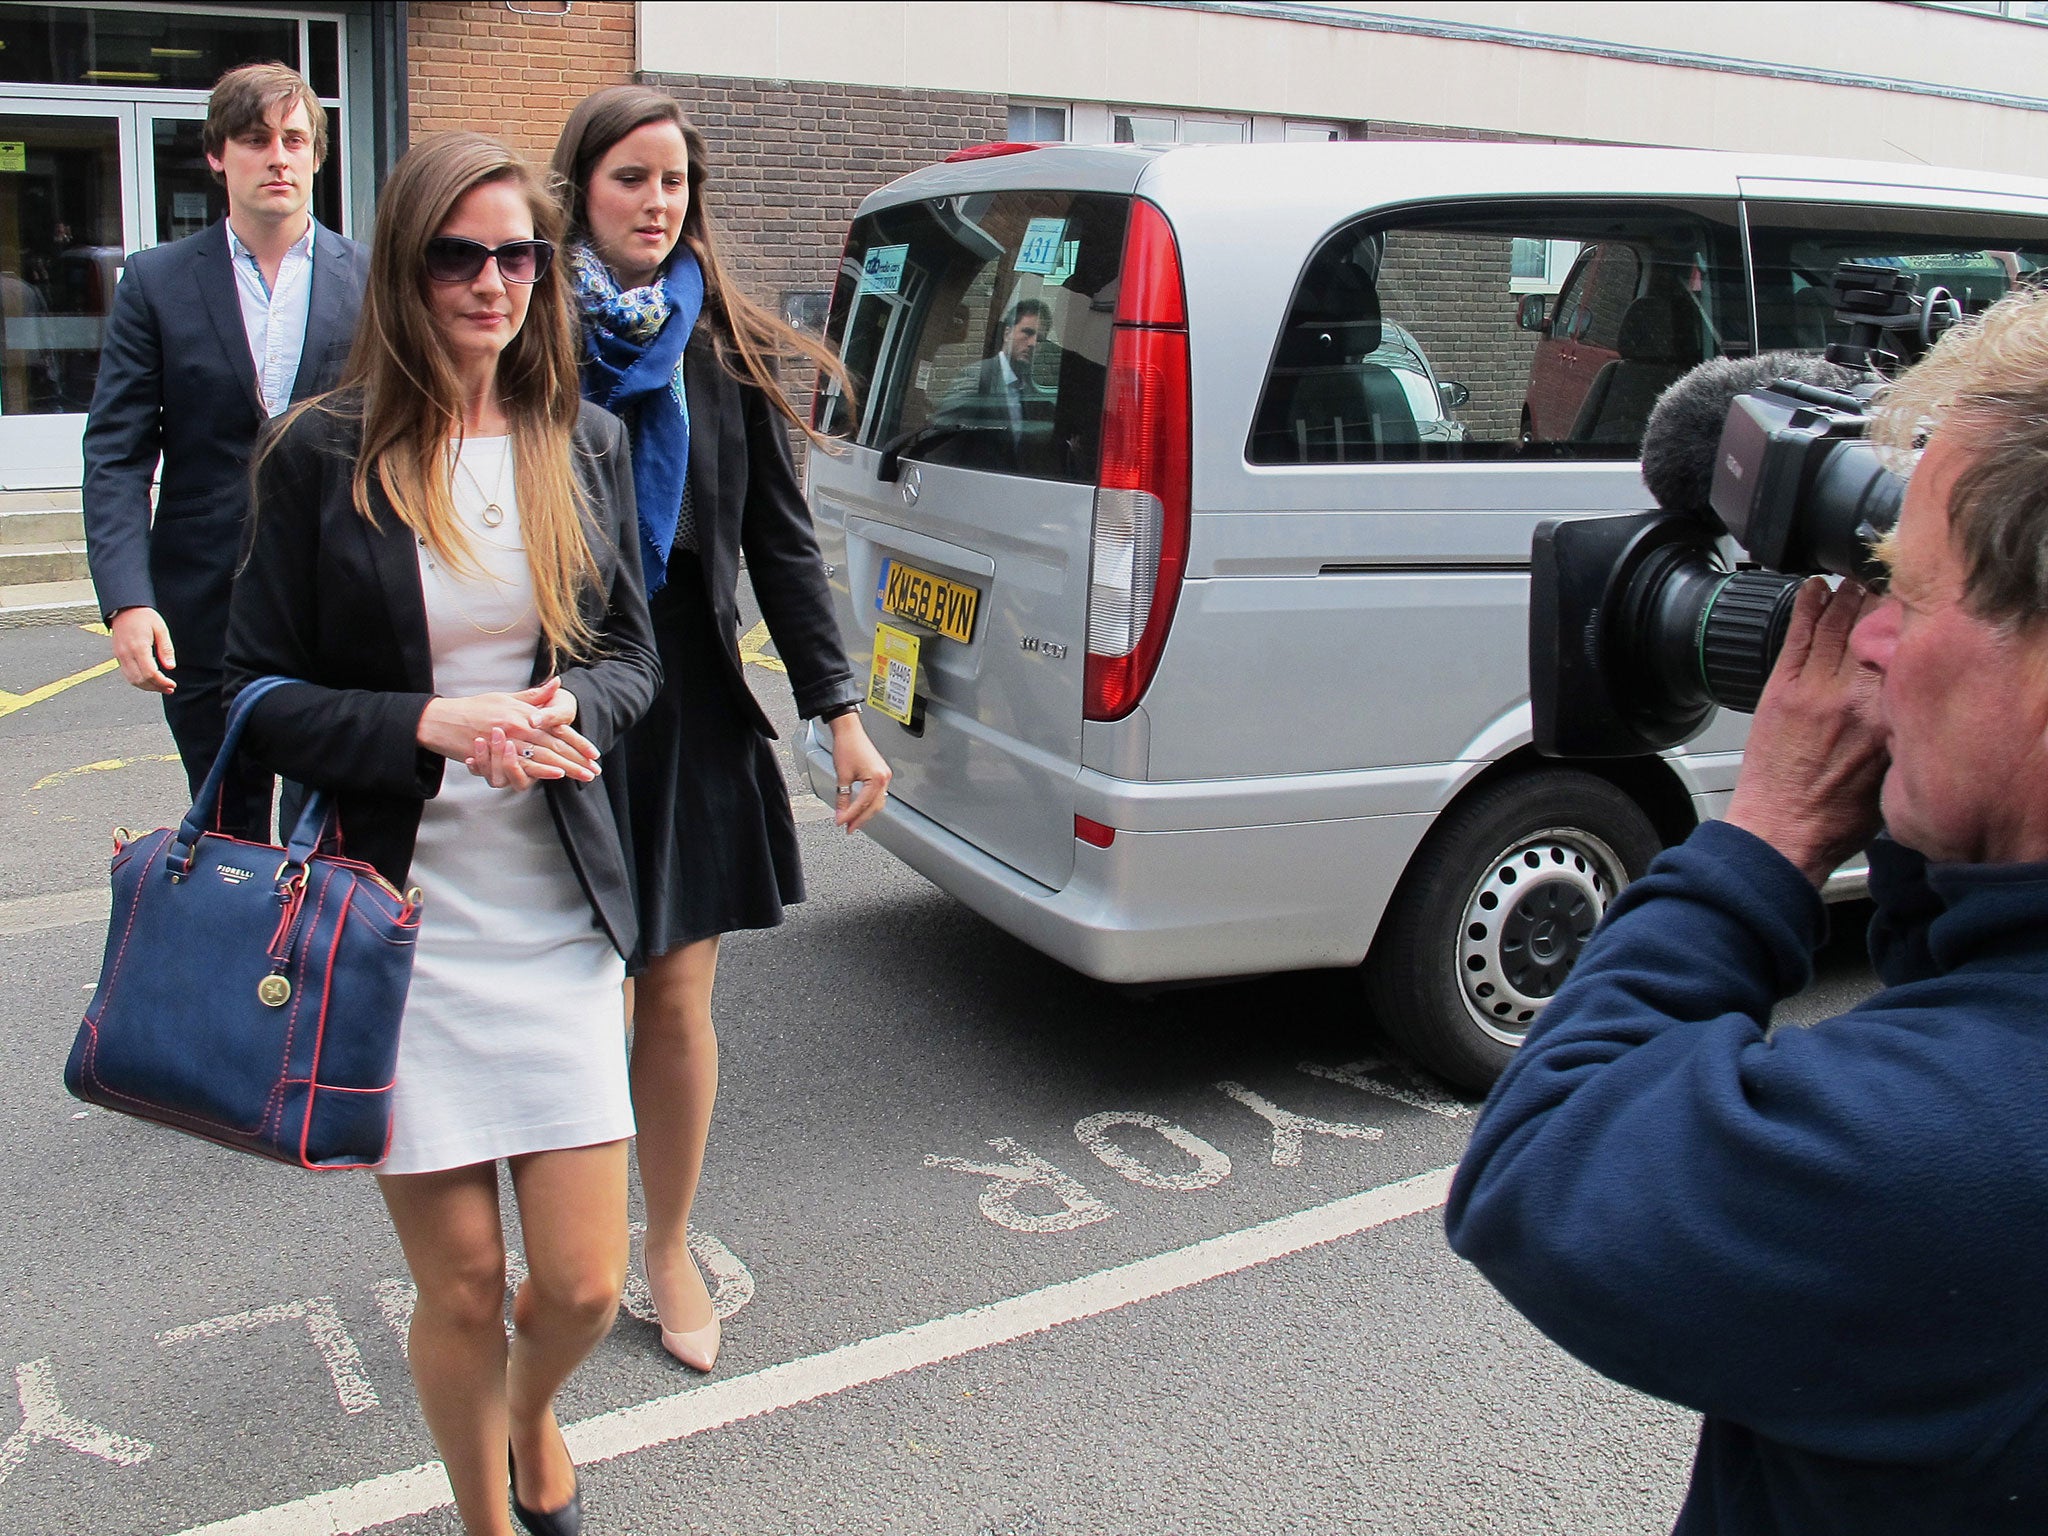 The widow of Cpl James Dunsby, Bryher Dunsby, centre, arrives at Solihull Council offices for the start of a four-week inquest into the death of her husband and two other Army reservists after a special forces test March in 2013